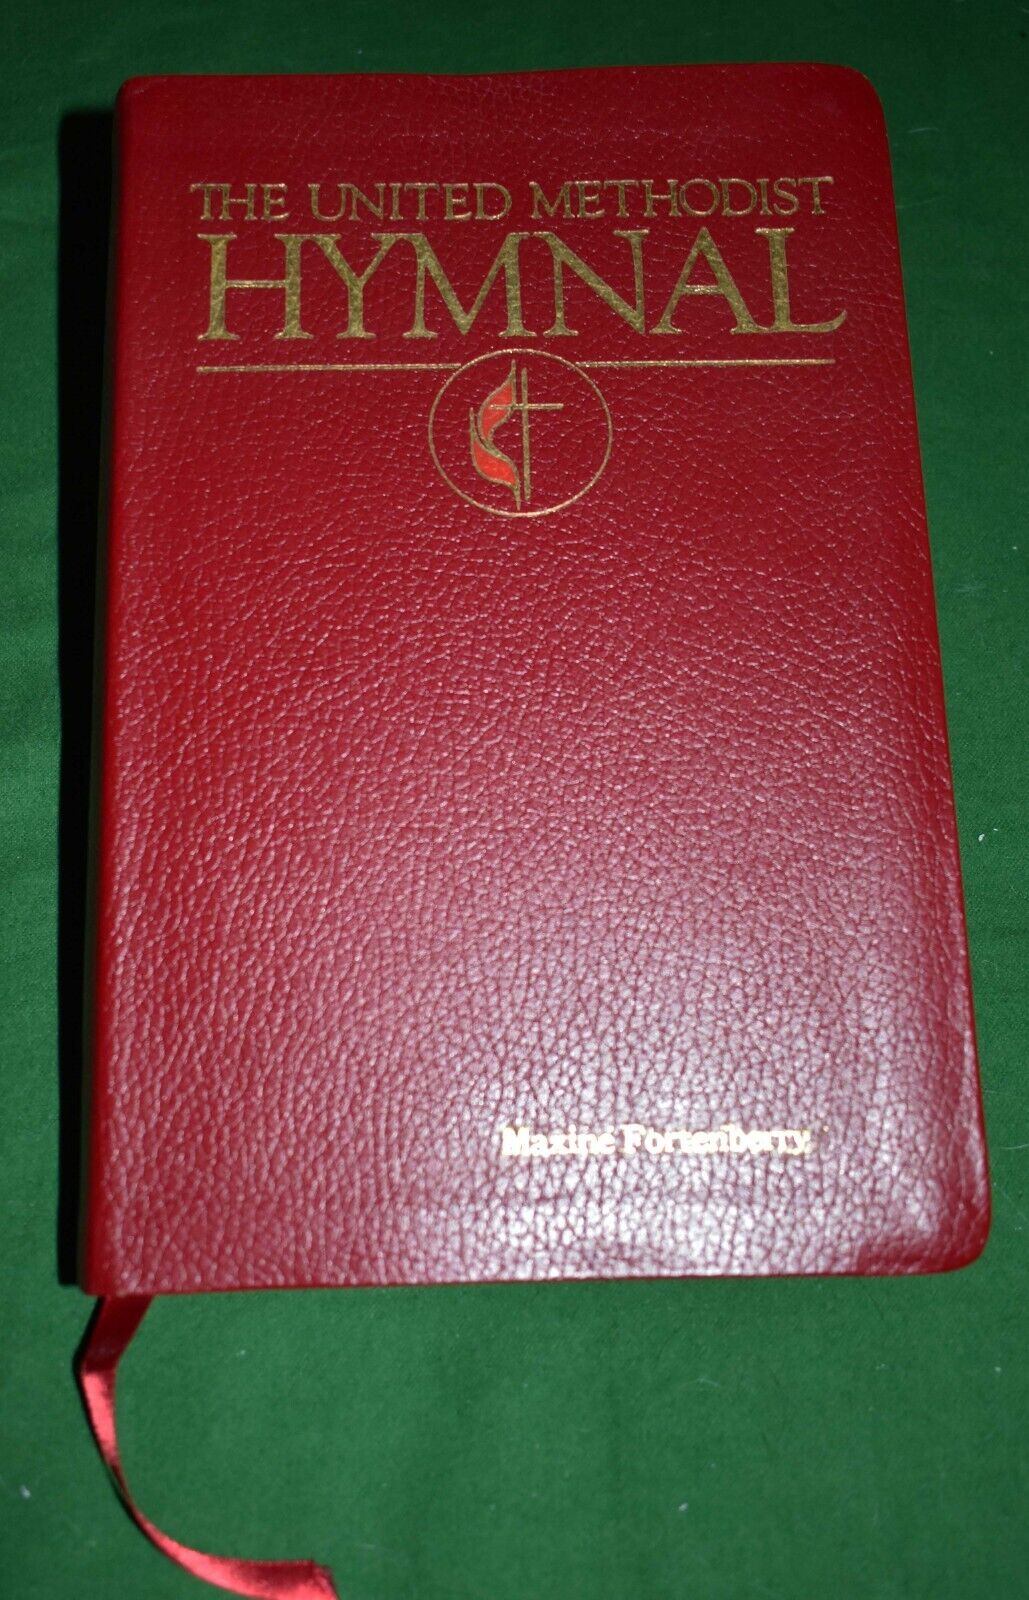 1989 UNITED METHODIST HYMNAL Flexible RED Binding PERFECT GOLD  EDGES Nice Used